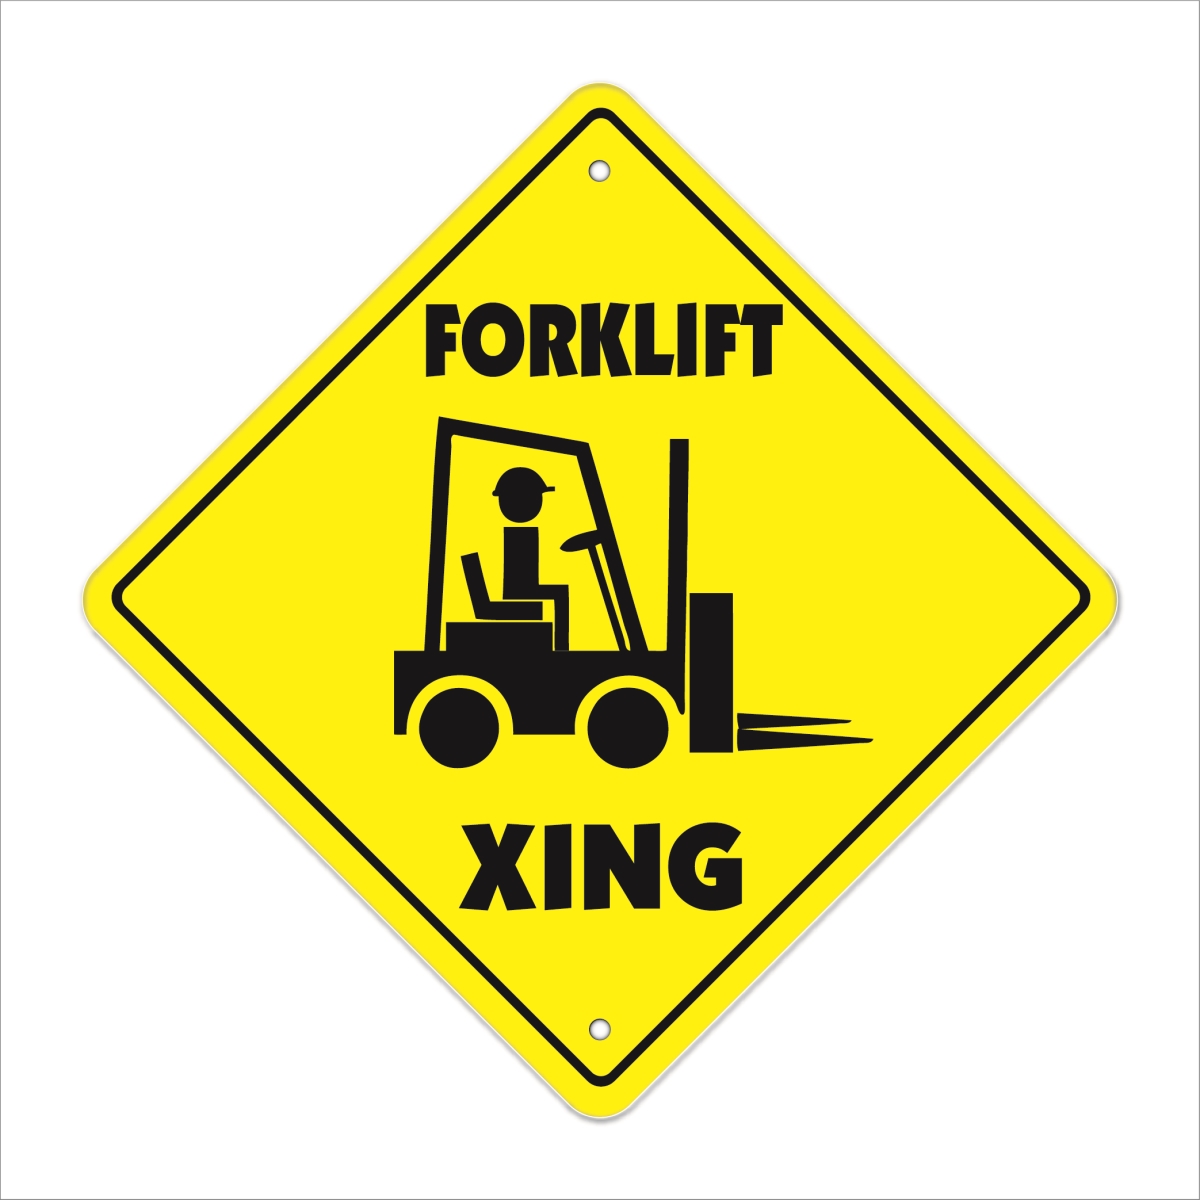 SignMission X-FORKLIFT XING 12 x 12 in. Zone Xing Crossing Sign - Forklift Xing